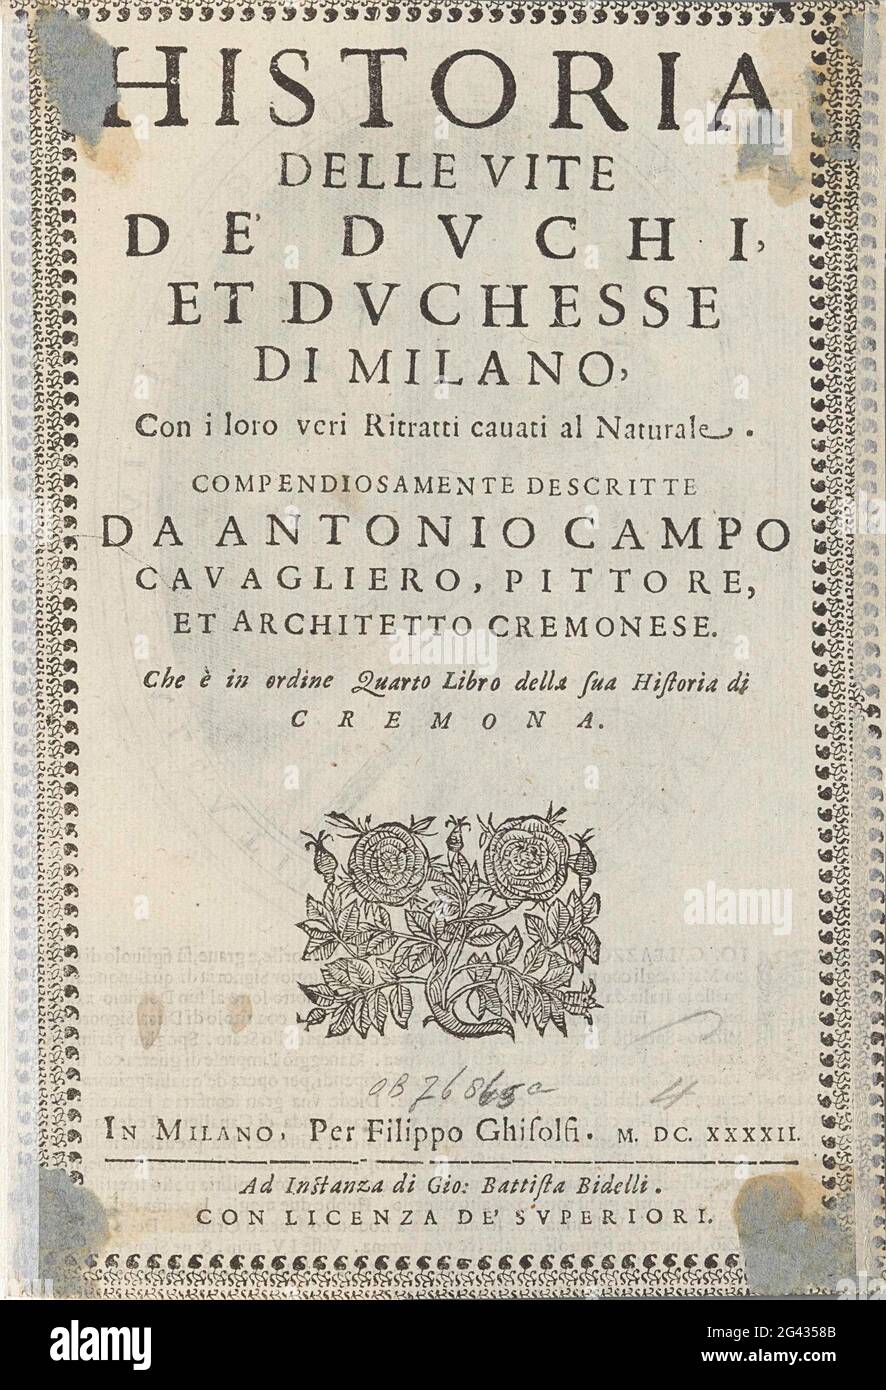 Title pagine with text and roses; Title page for: Antonio Campo, Historia delle Vite de Duchi et Duchesse of Milan (...), Mianean 1642. Title: Historia of the Vite de Duchi et Duchesse of Milan ... Milan 1642. From: Ant. Campo, Cremona Fedelissima Citta, et Nobilissima Colonia de Novels Represented in Drawing with its countryside; Et illustrated by a letter Historia. Stock Photo